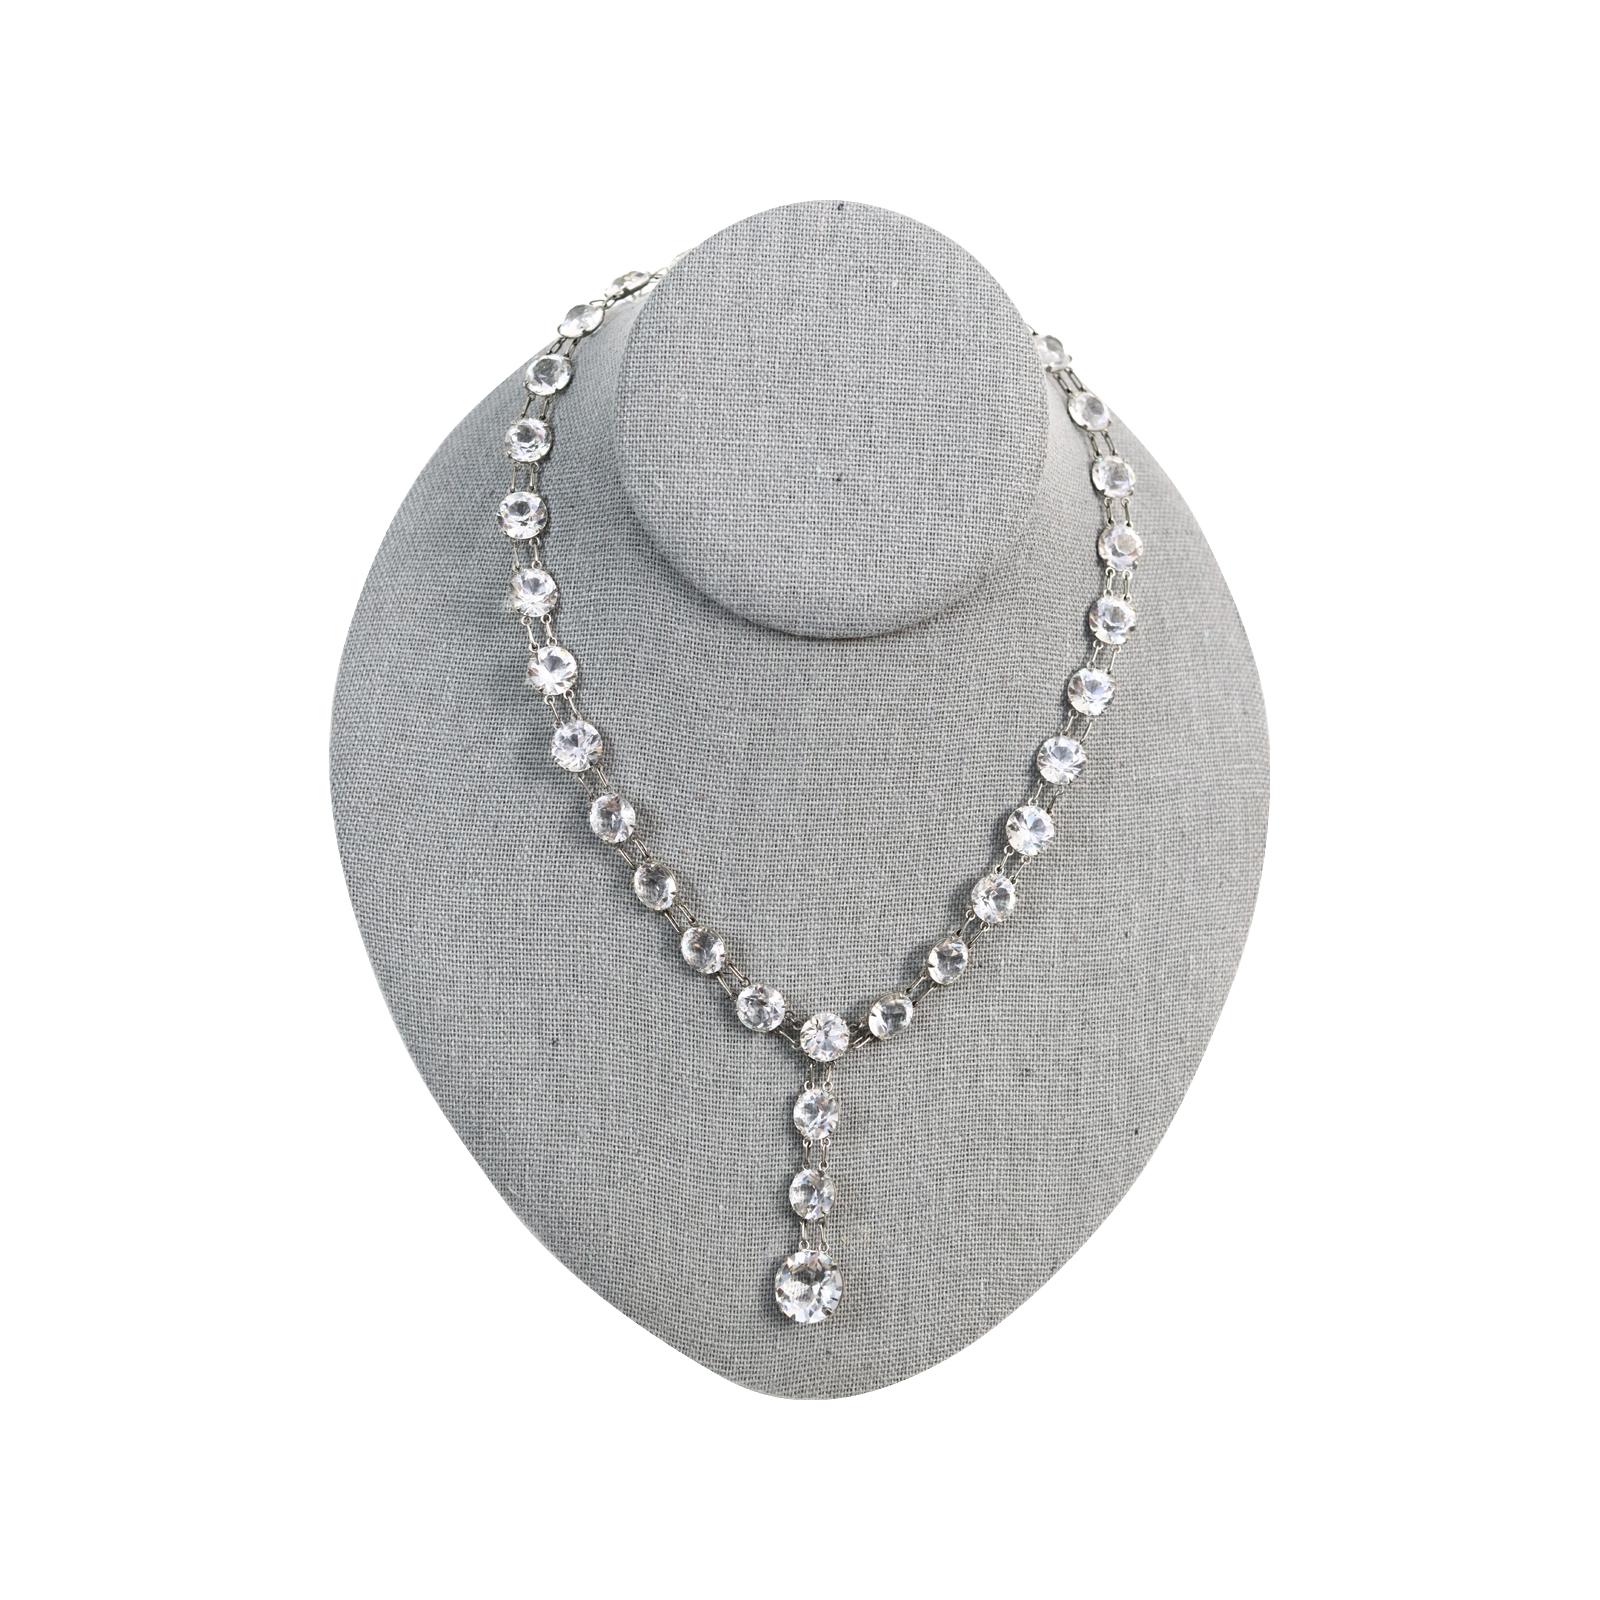 Vintage Open Back Crystal Necklace with Dangling Piece. The crystals are in a silver tone base with double links holding them.  These look like diamonds on the skin and are just magnificent. The biggest dealers from India sell these necklaces in